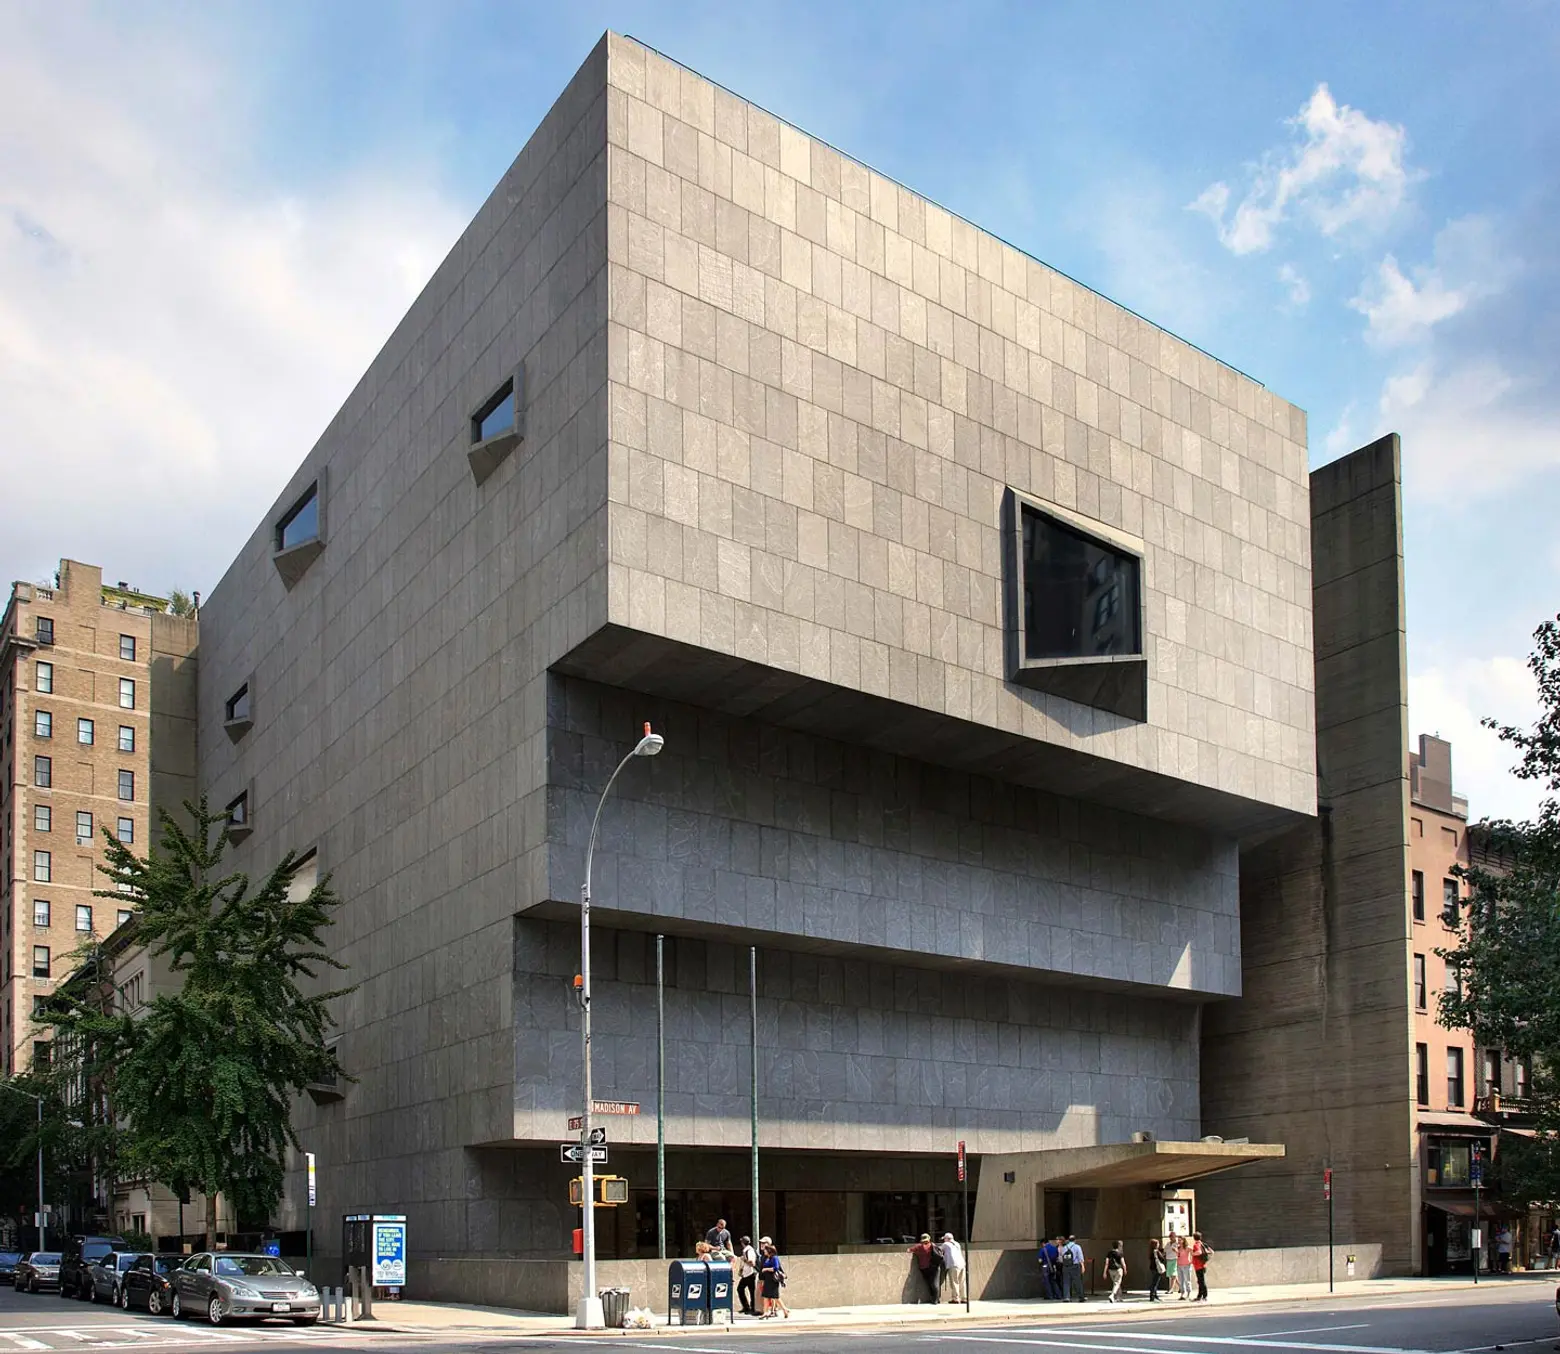 The Frick will take over the Breuer building from the Met